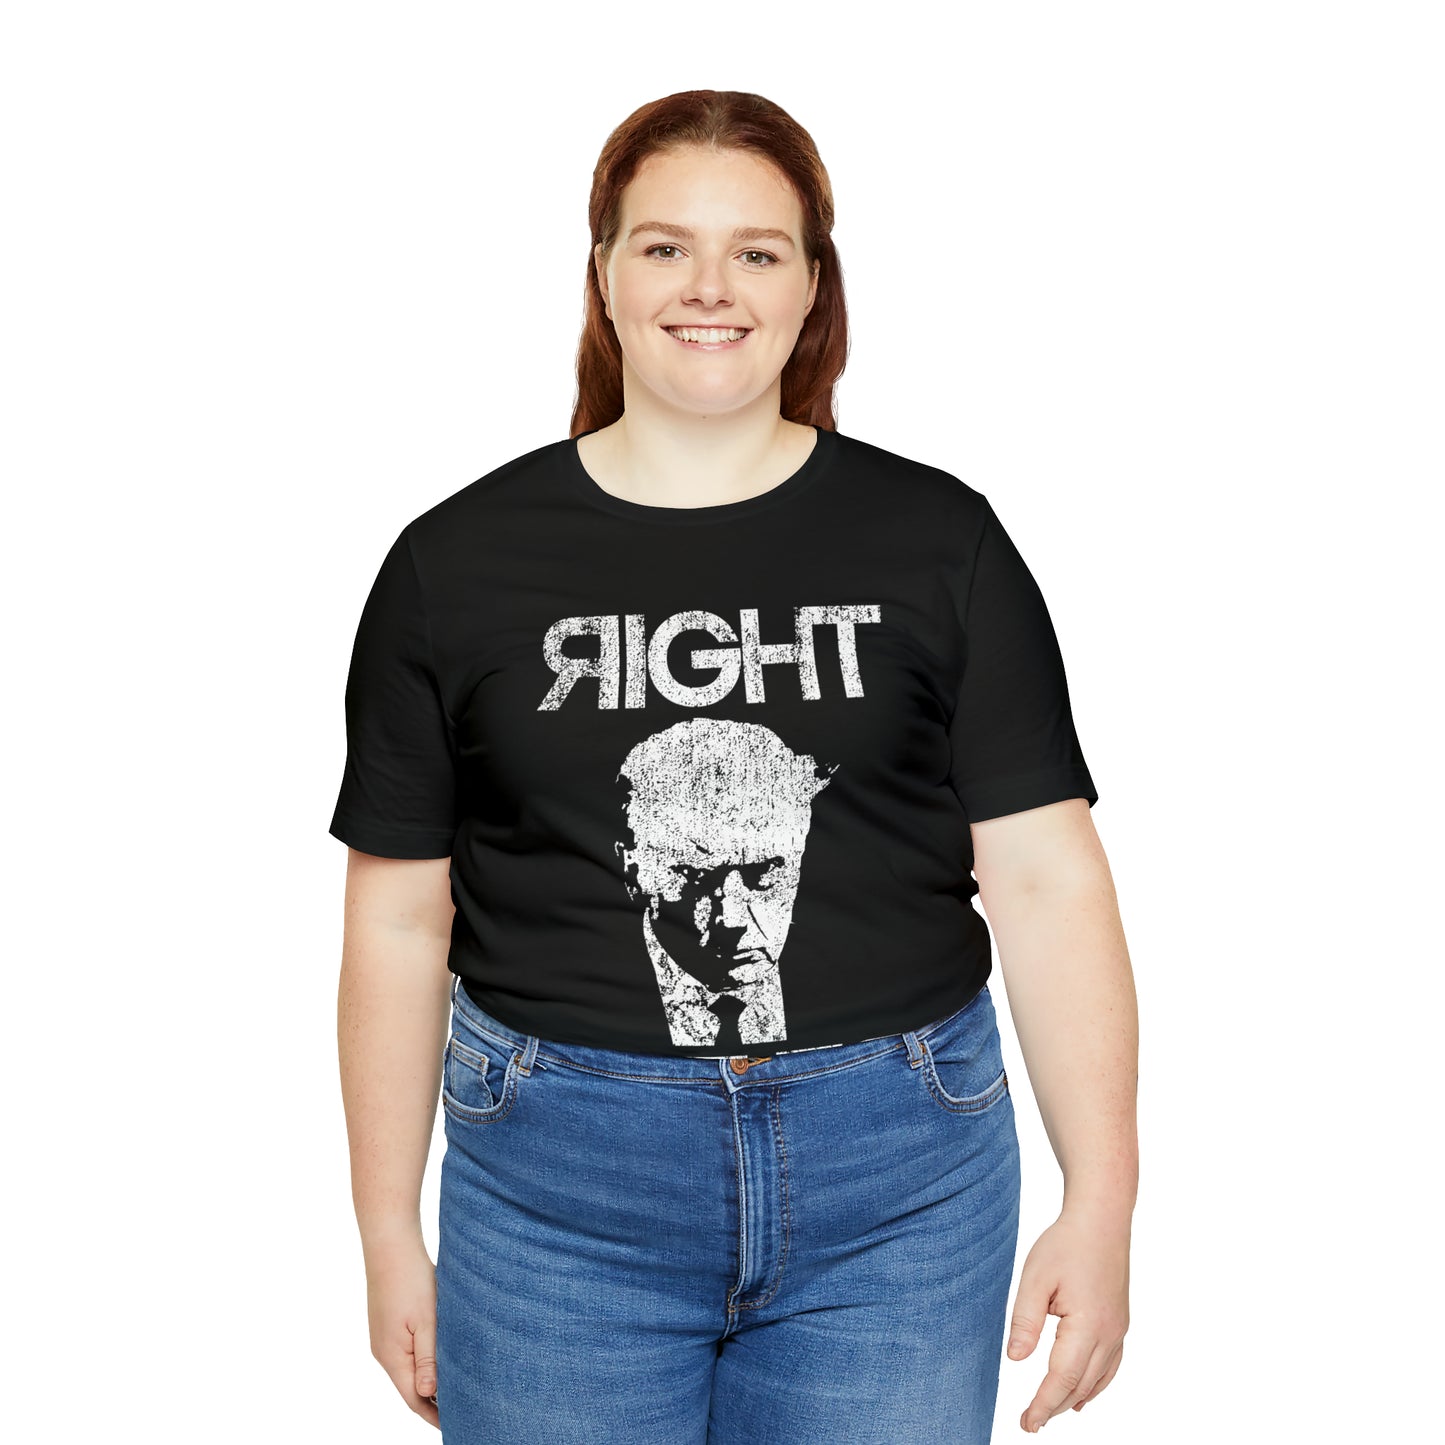 Right Father Short Sleeve Soft Tee